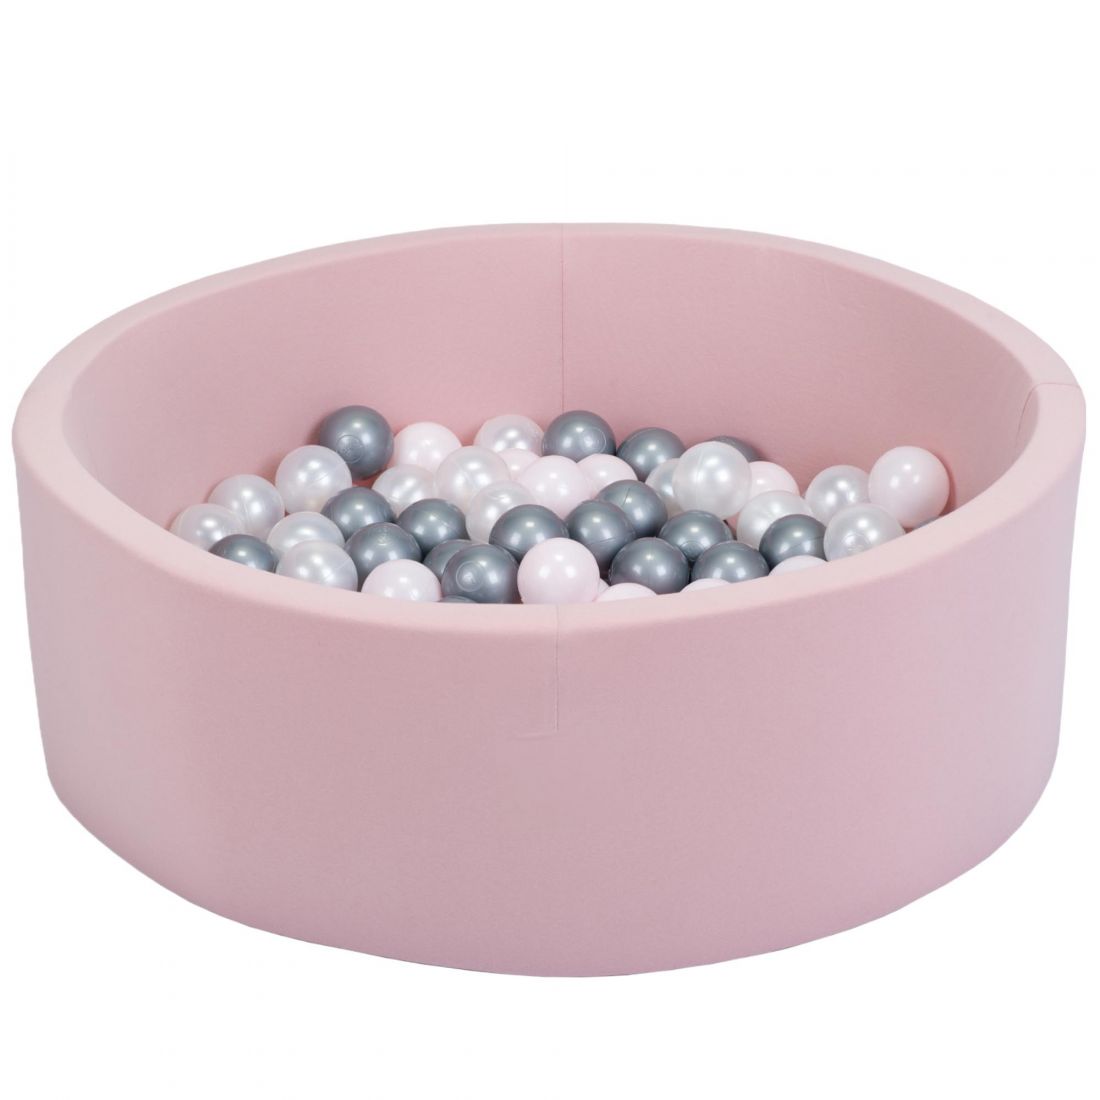 Misioo Ball Pit 90x40 Round Smart Pink, Girlish
